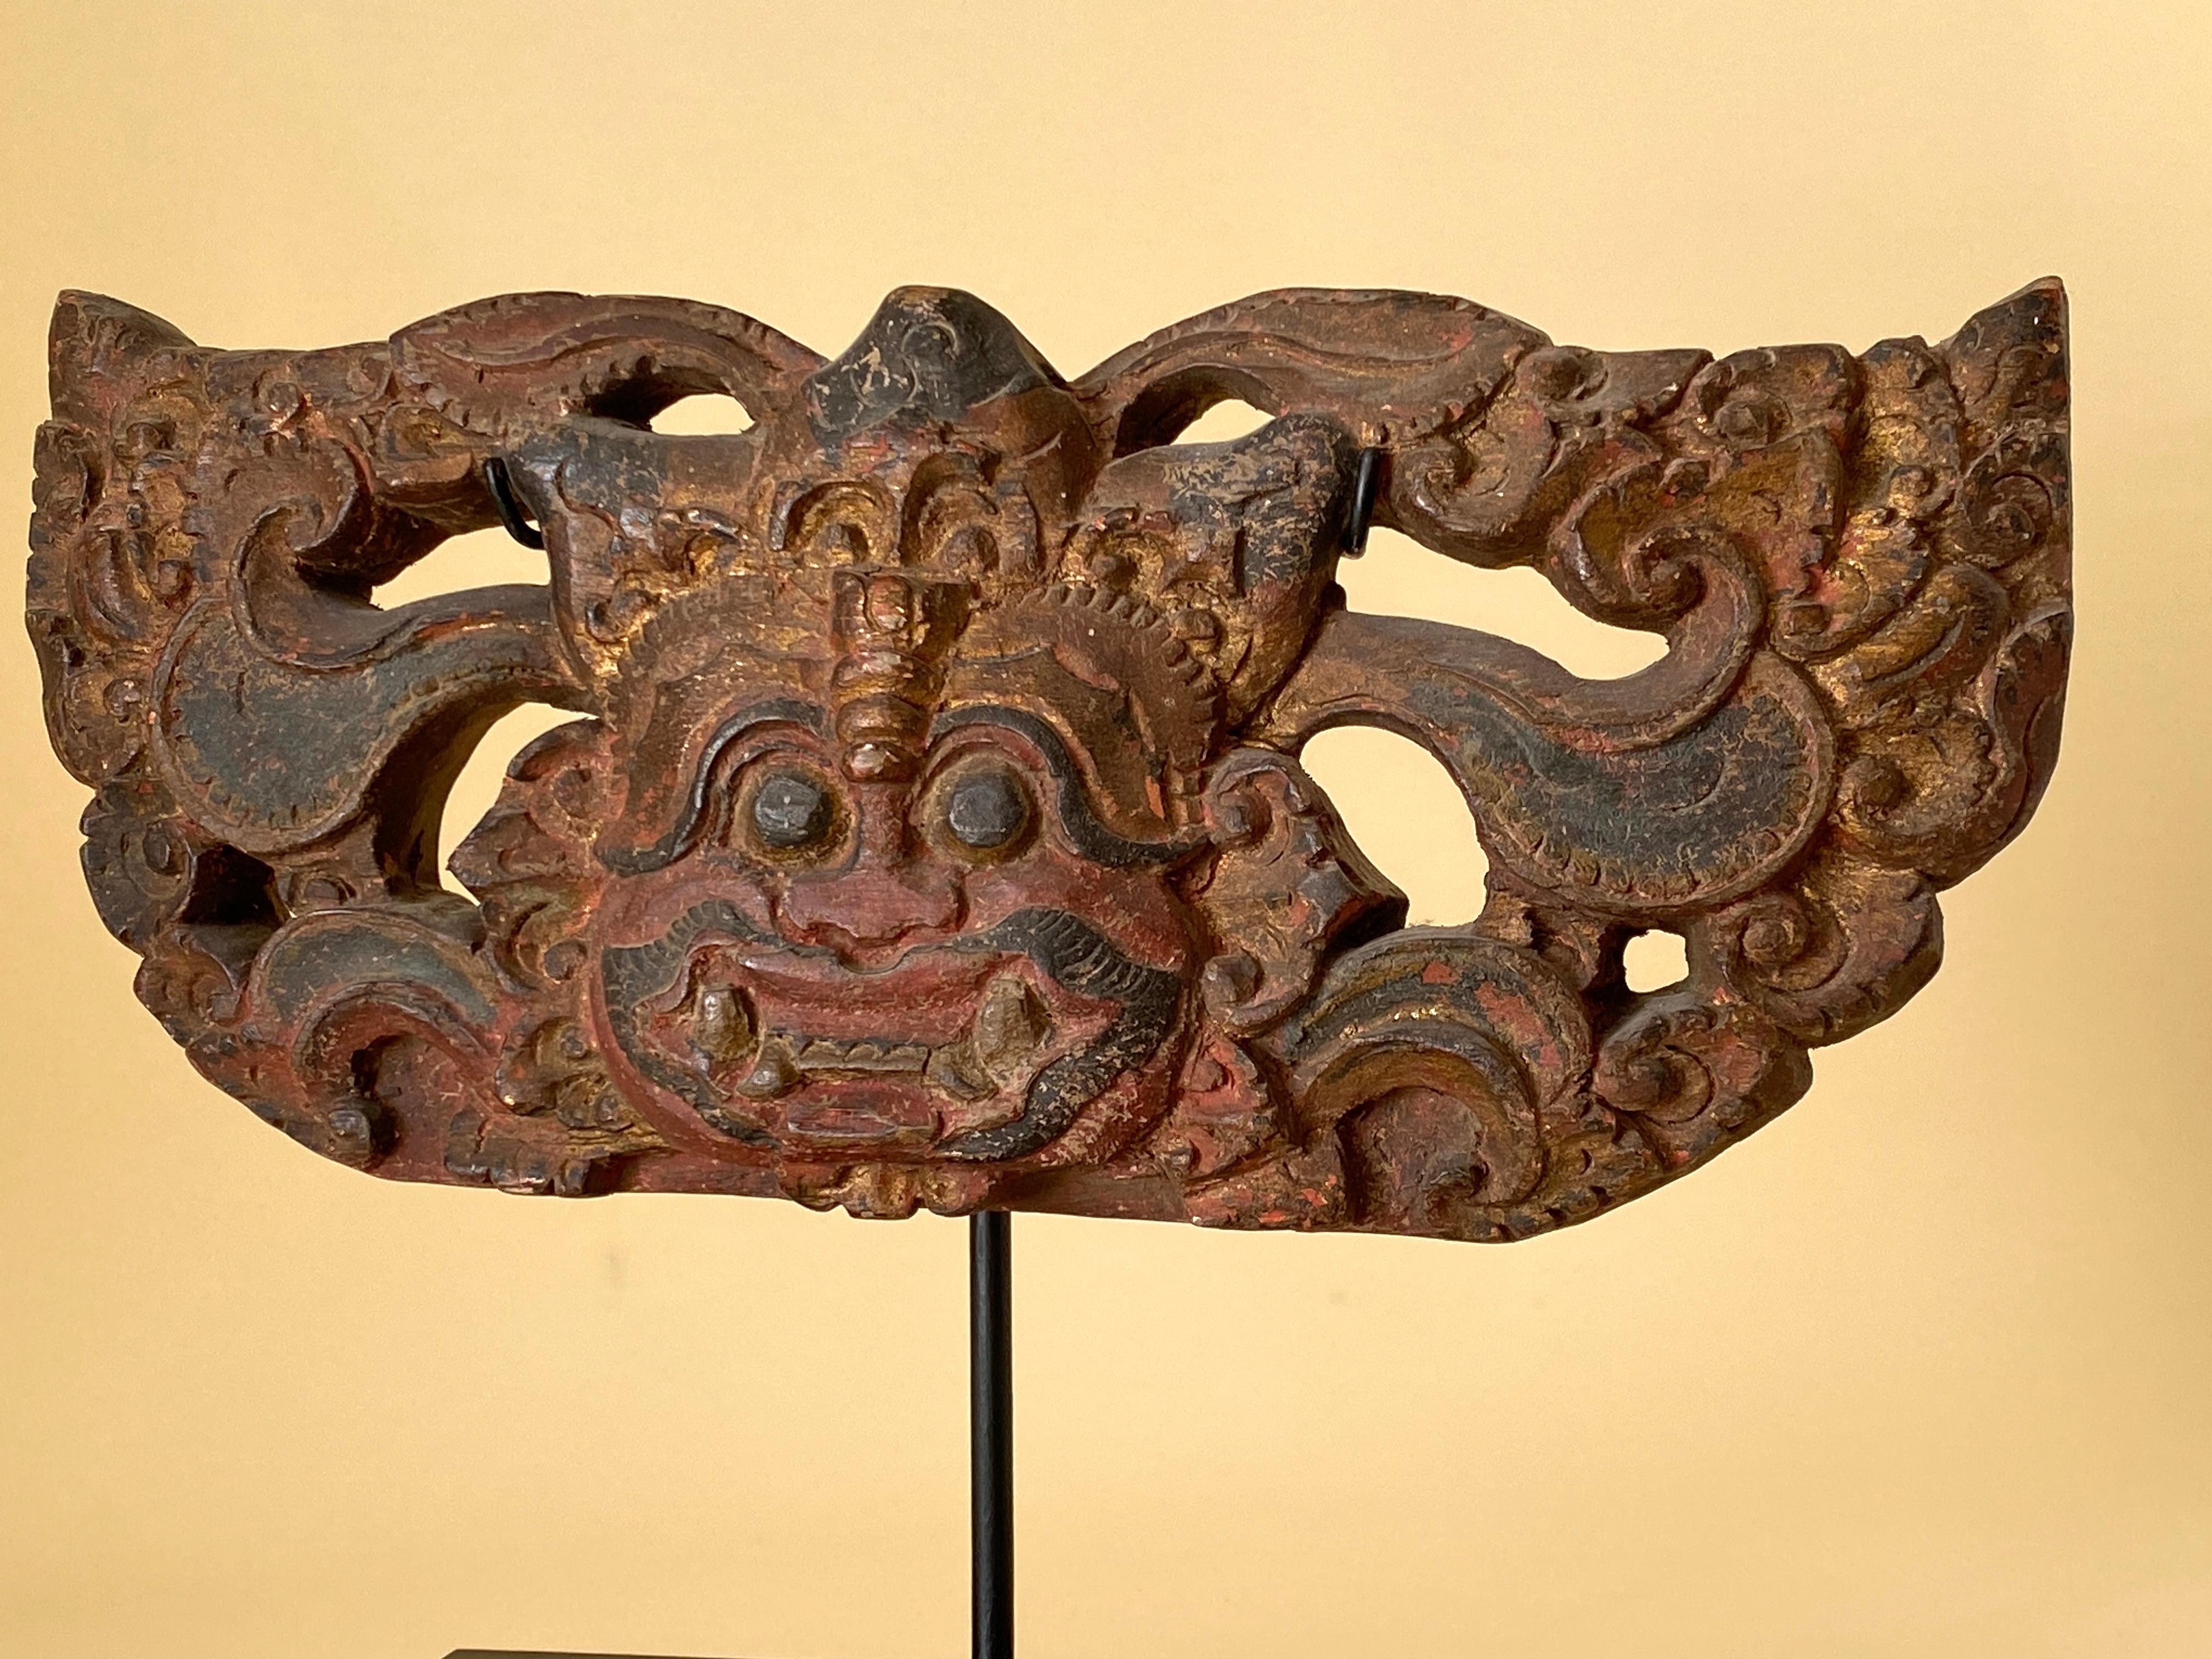 A delightful door or threshold guardian figure, called Boma (alt. Bhoma), from Bali, Indonesia, early 20th century. Wood with pigments, mostly red and black with some gold.
Boma are fearsome heads surrounded by foliate scrolls placed on lintels